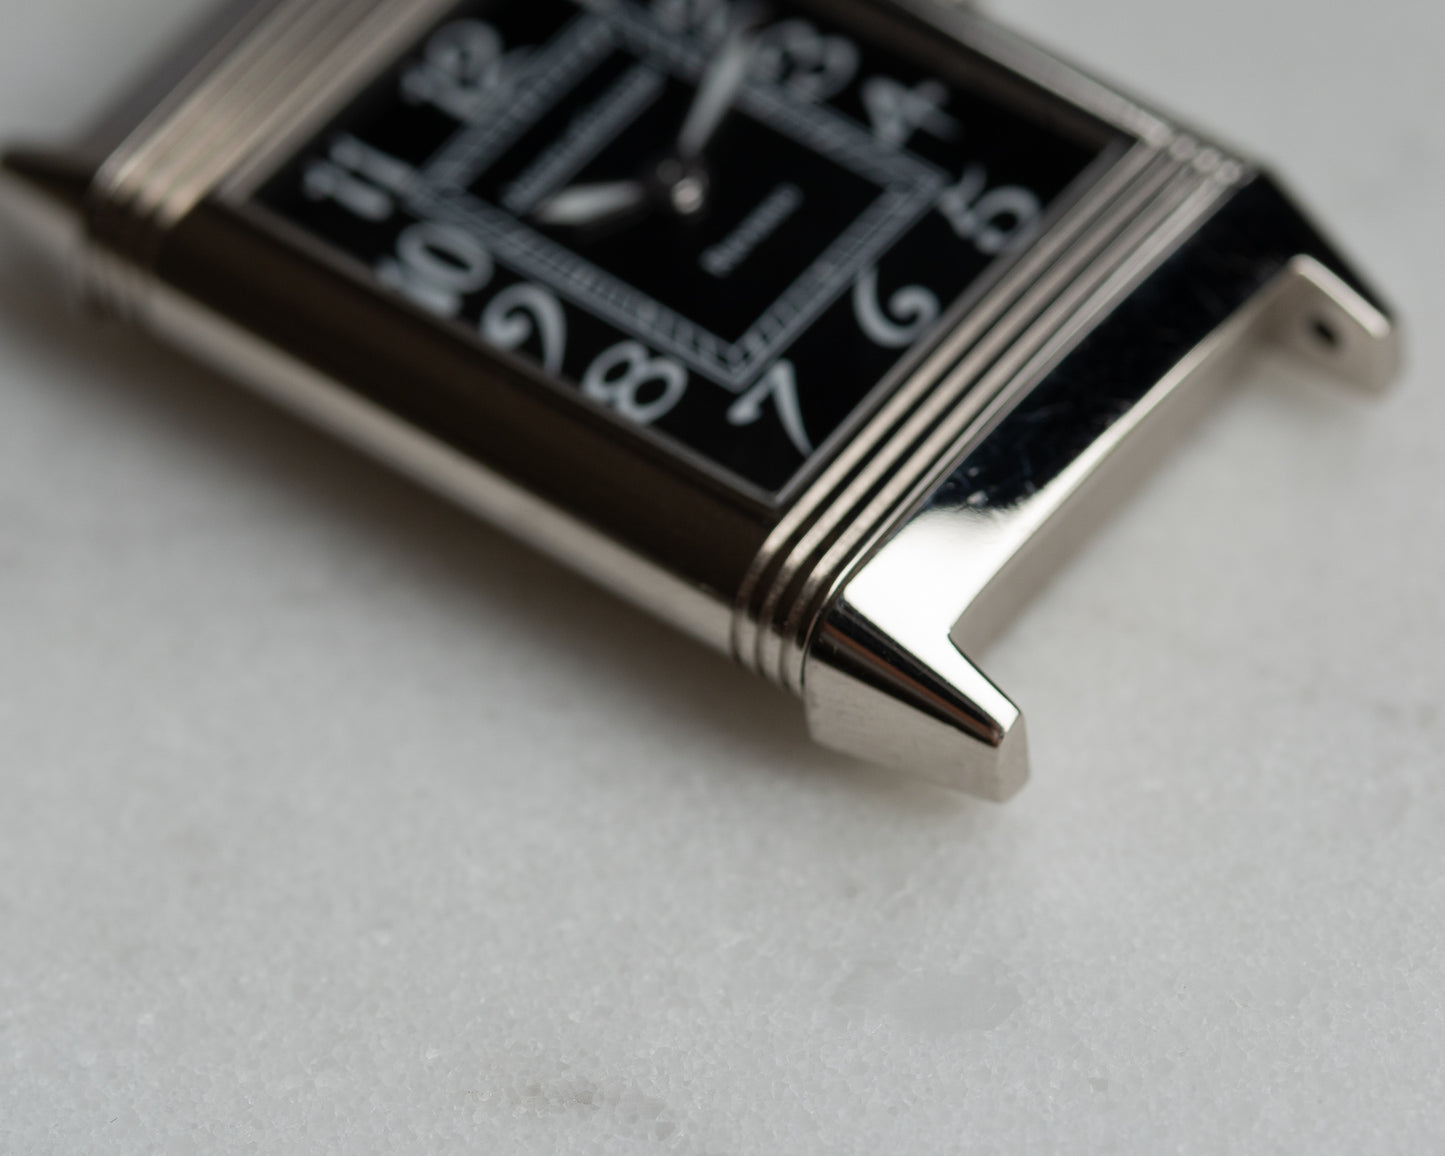 Jaeger-LeCoultre Reverso 250.3.86 in white gold from early 2000's